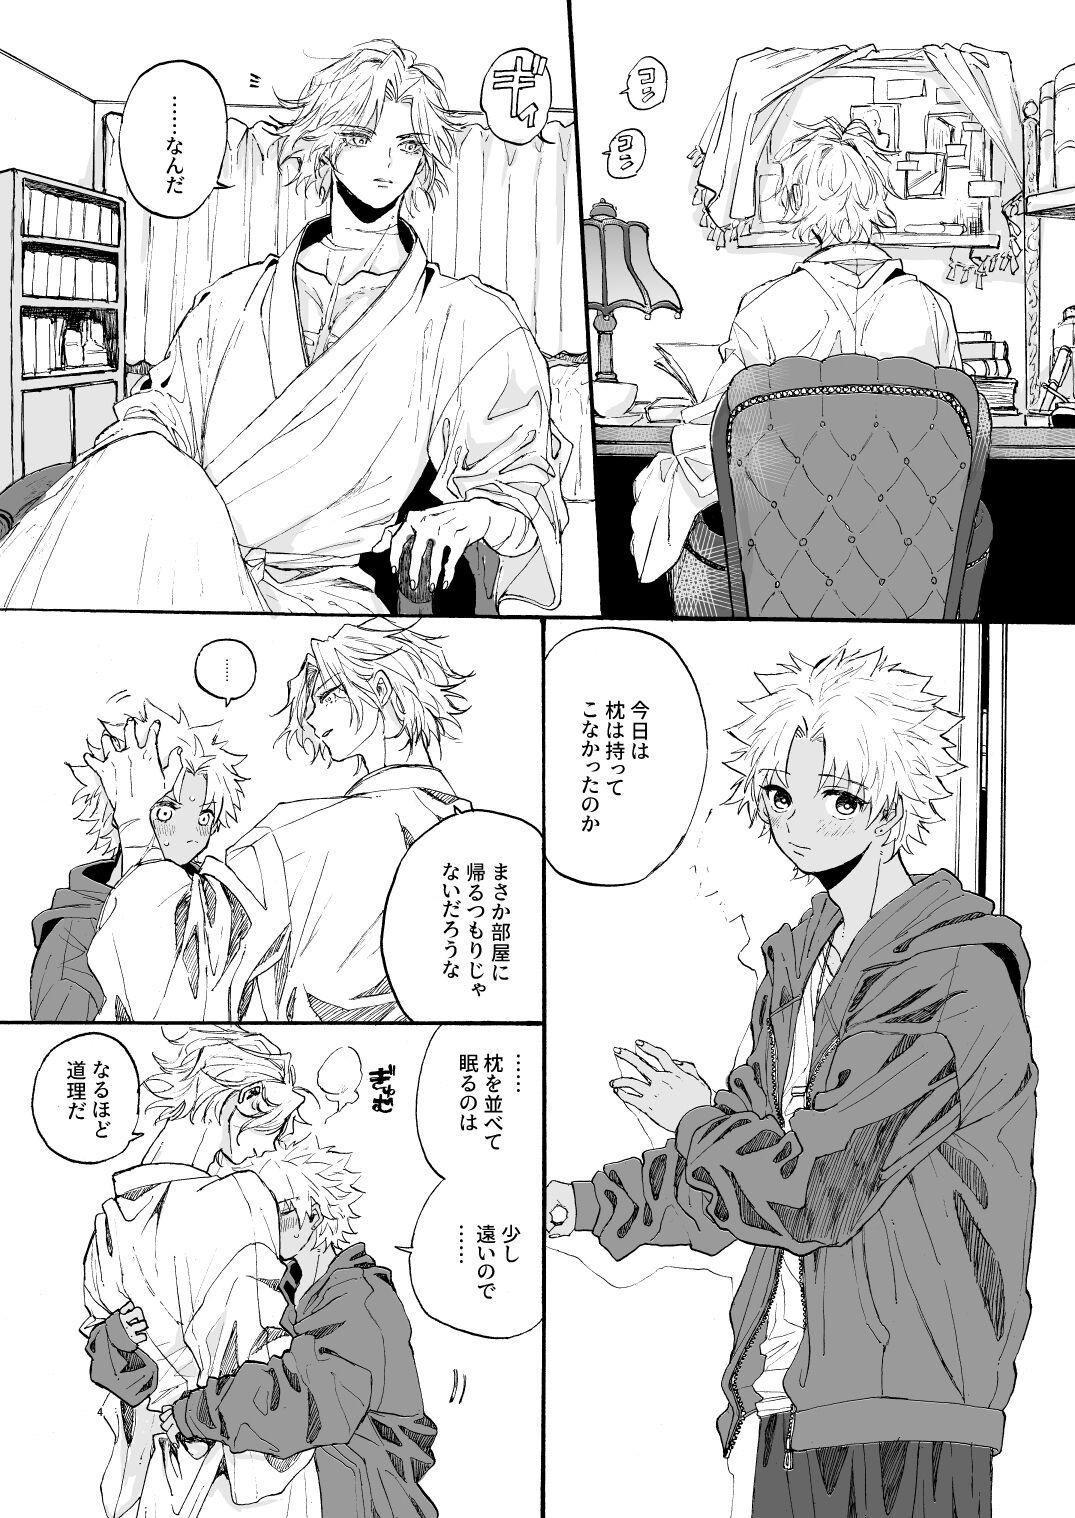 Jerkoff Sotsugyou - Fate grand order Shoplifter - Page 5